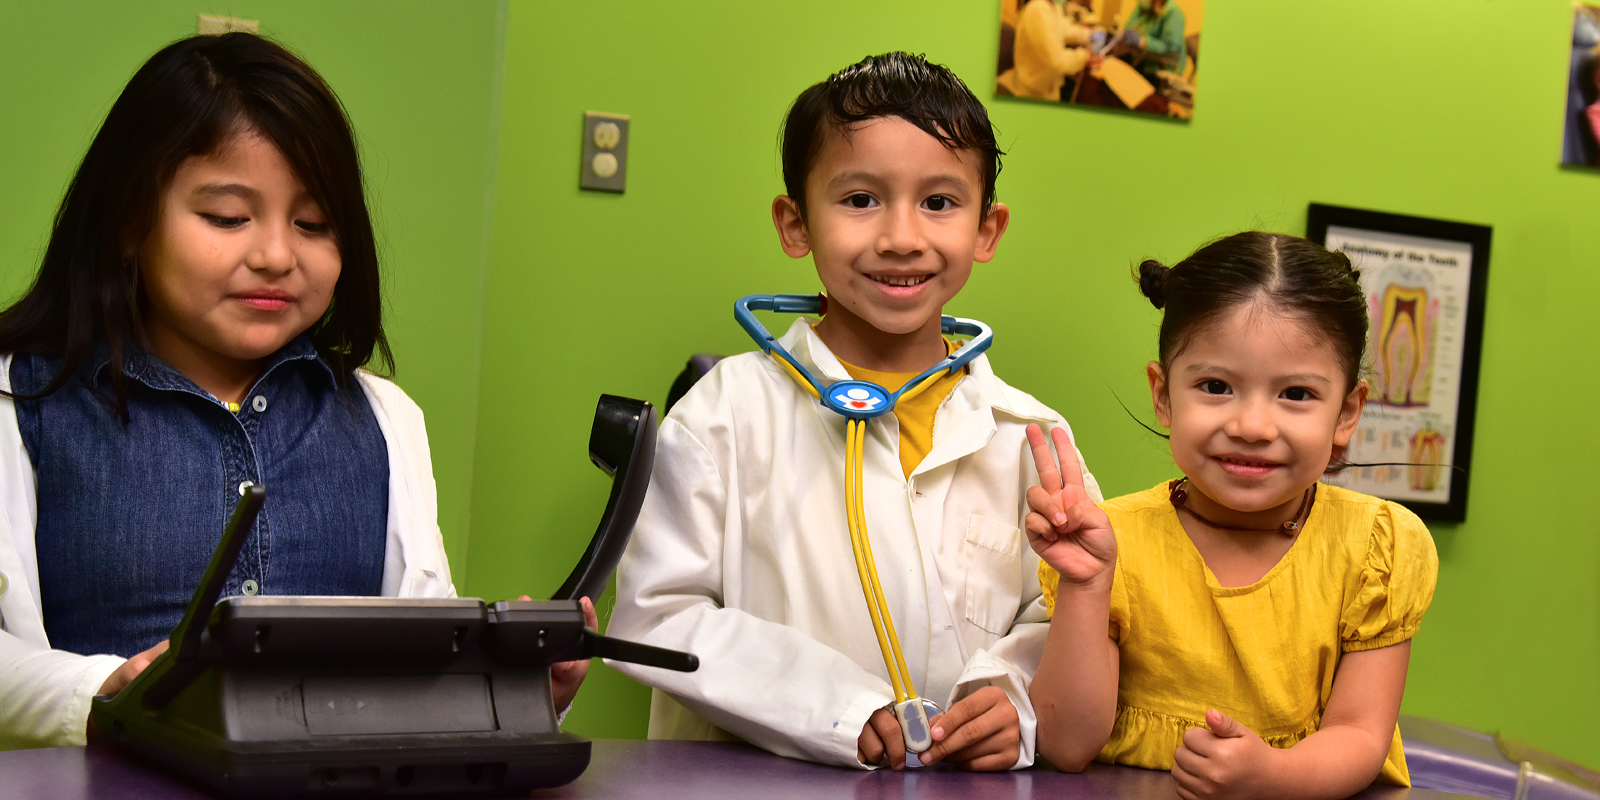 Three young children smiling in a room with bright green walls. Young boy wearing a play doctor outfit.